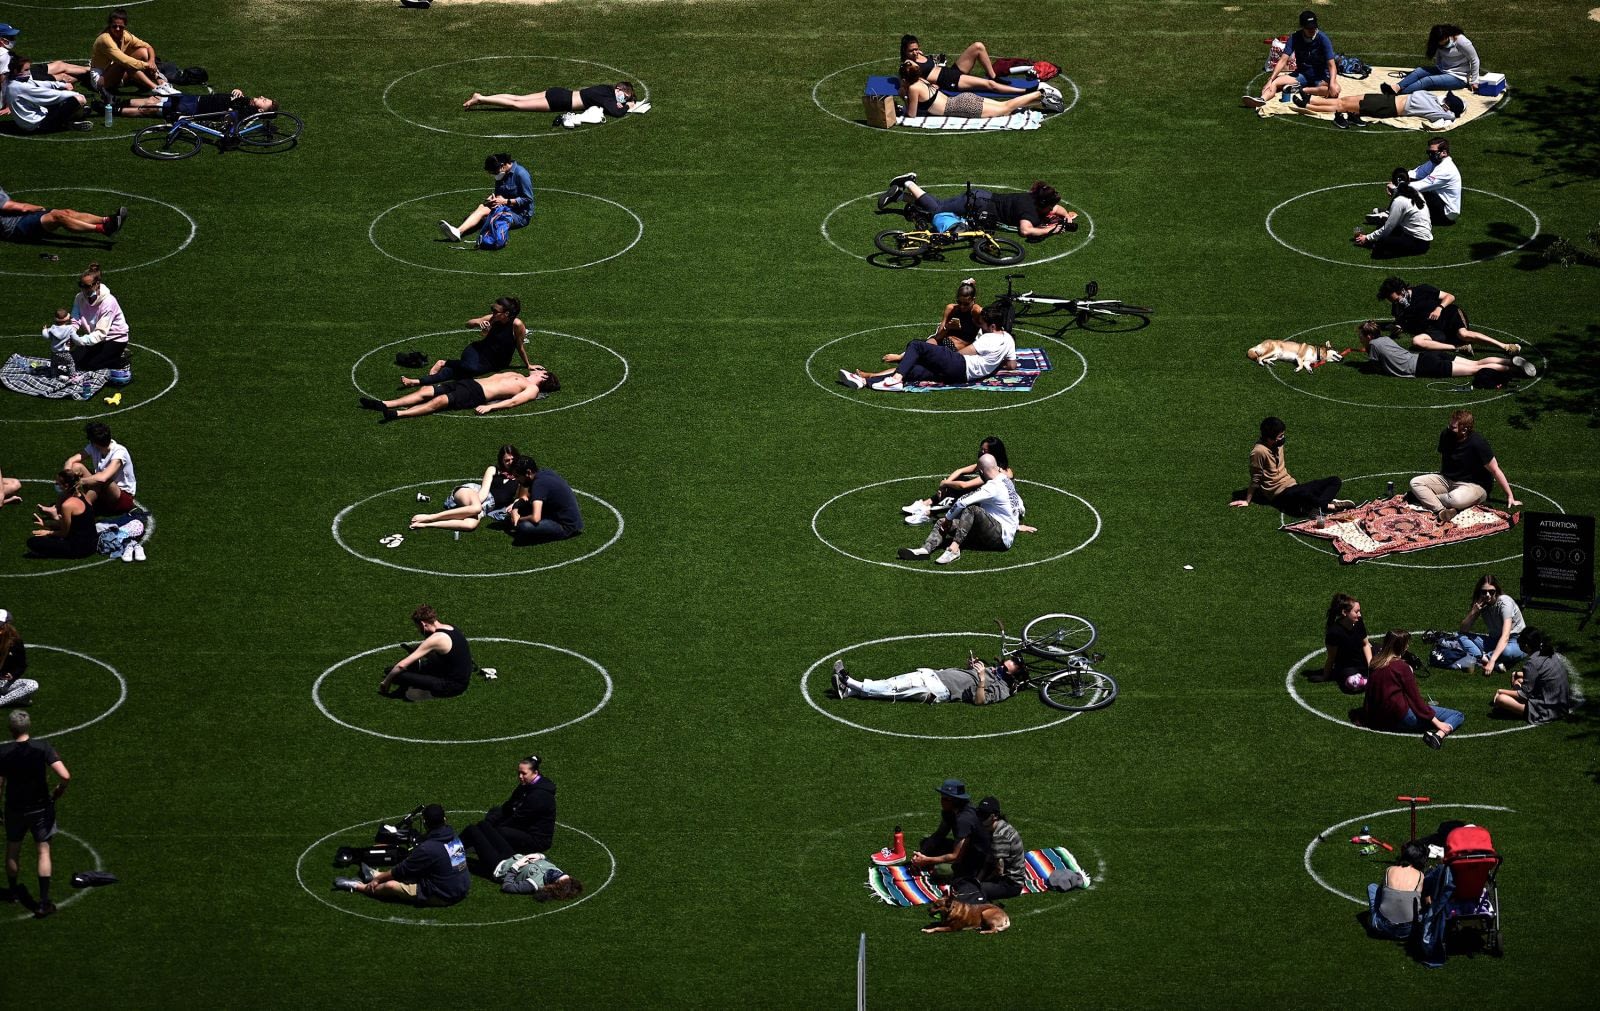 May 17, Domino Park, New York: People practice social distancing in circles drawn on the grass.